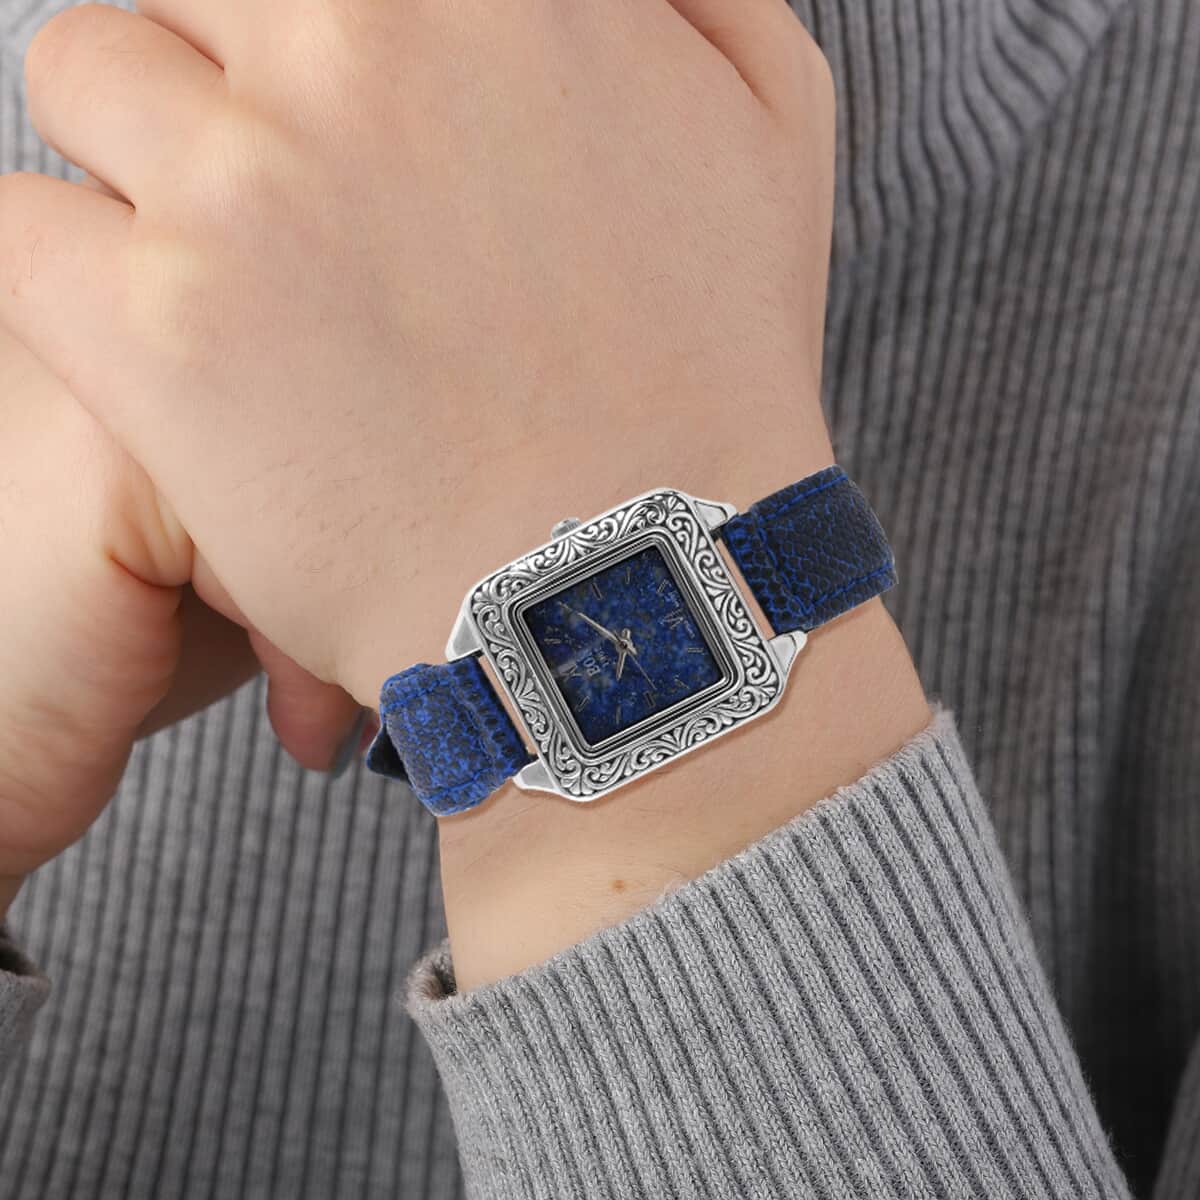 BALI LEGACY EON 1962 Lapis Lazuli Swiss Movement Watch in Sterling Silver and Stainless Steel with Royal Blue Lizard Color Leather Strap (20 g) image number 2